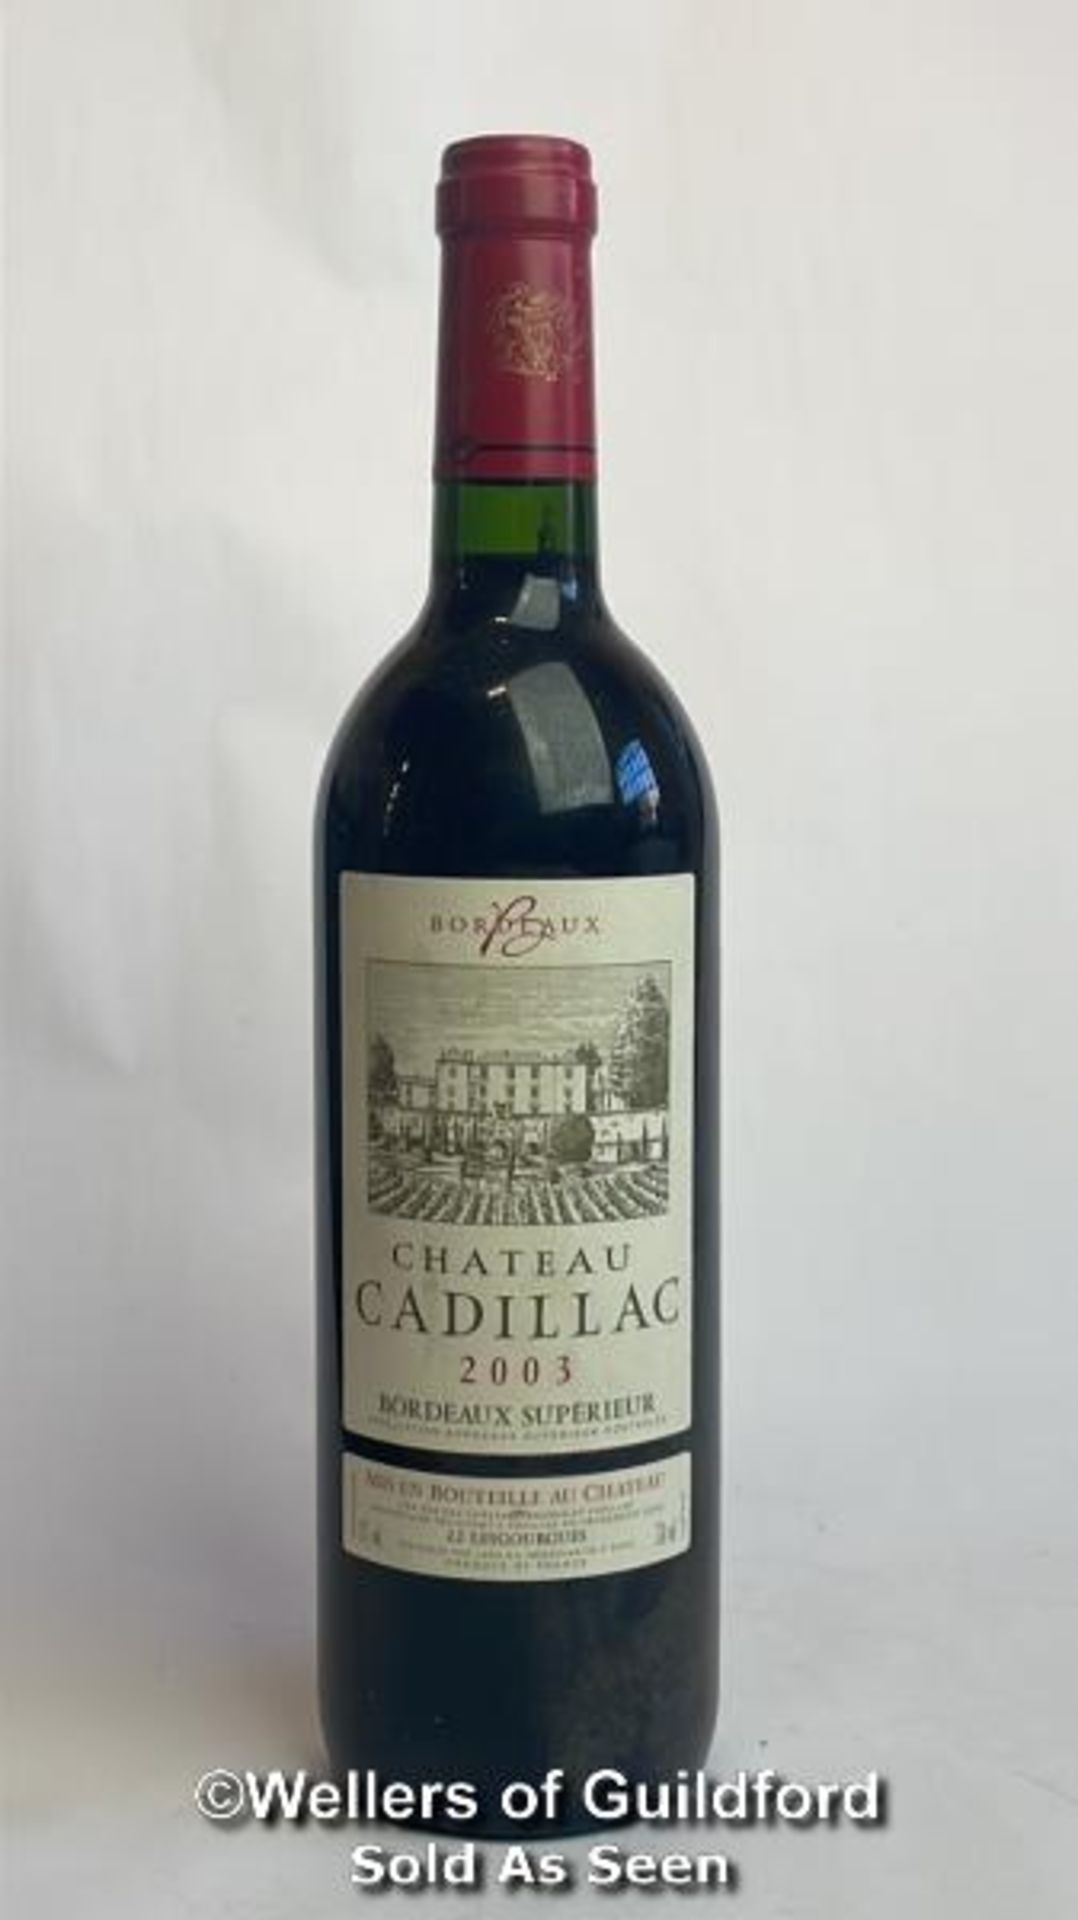 2003 Chateau Cadillac, Bordeaux Superieur, 75cl, 12% vol / Please see images for fill level and